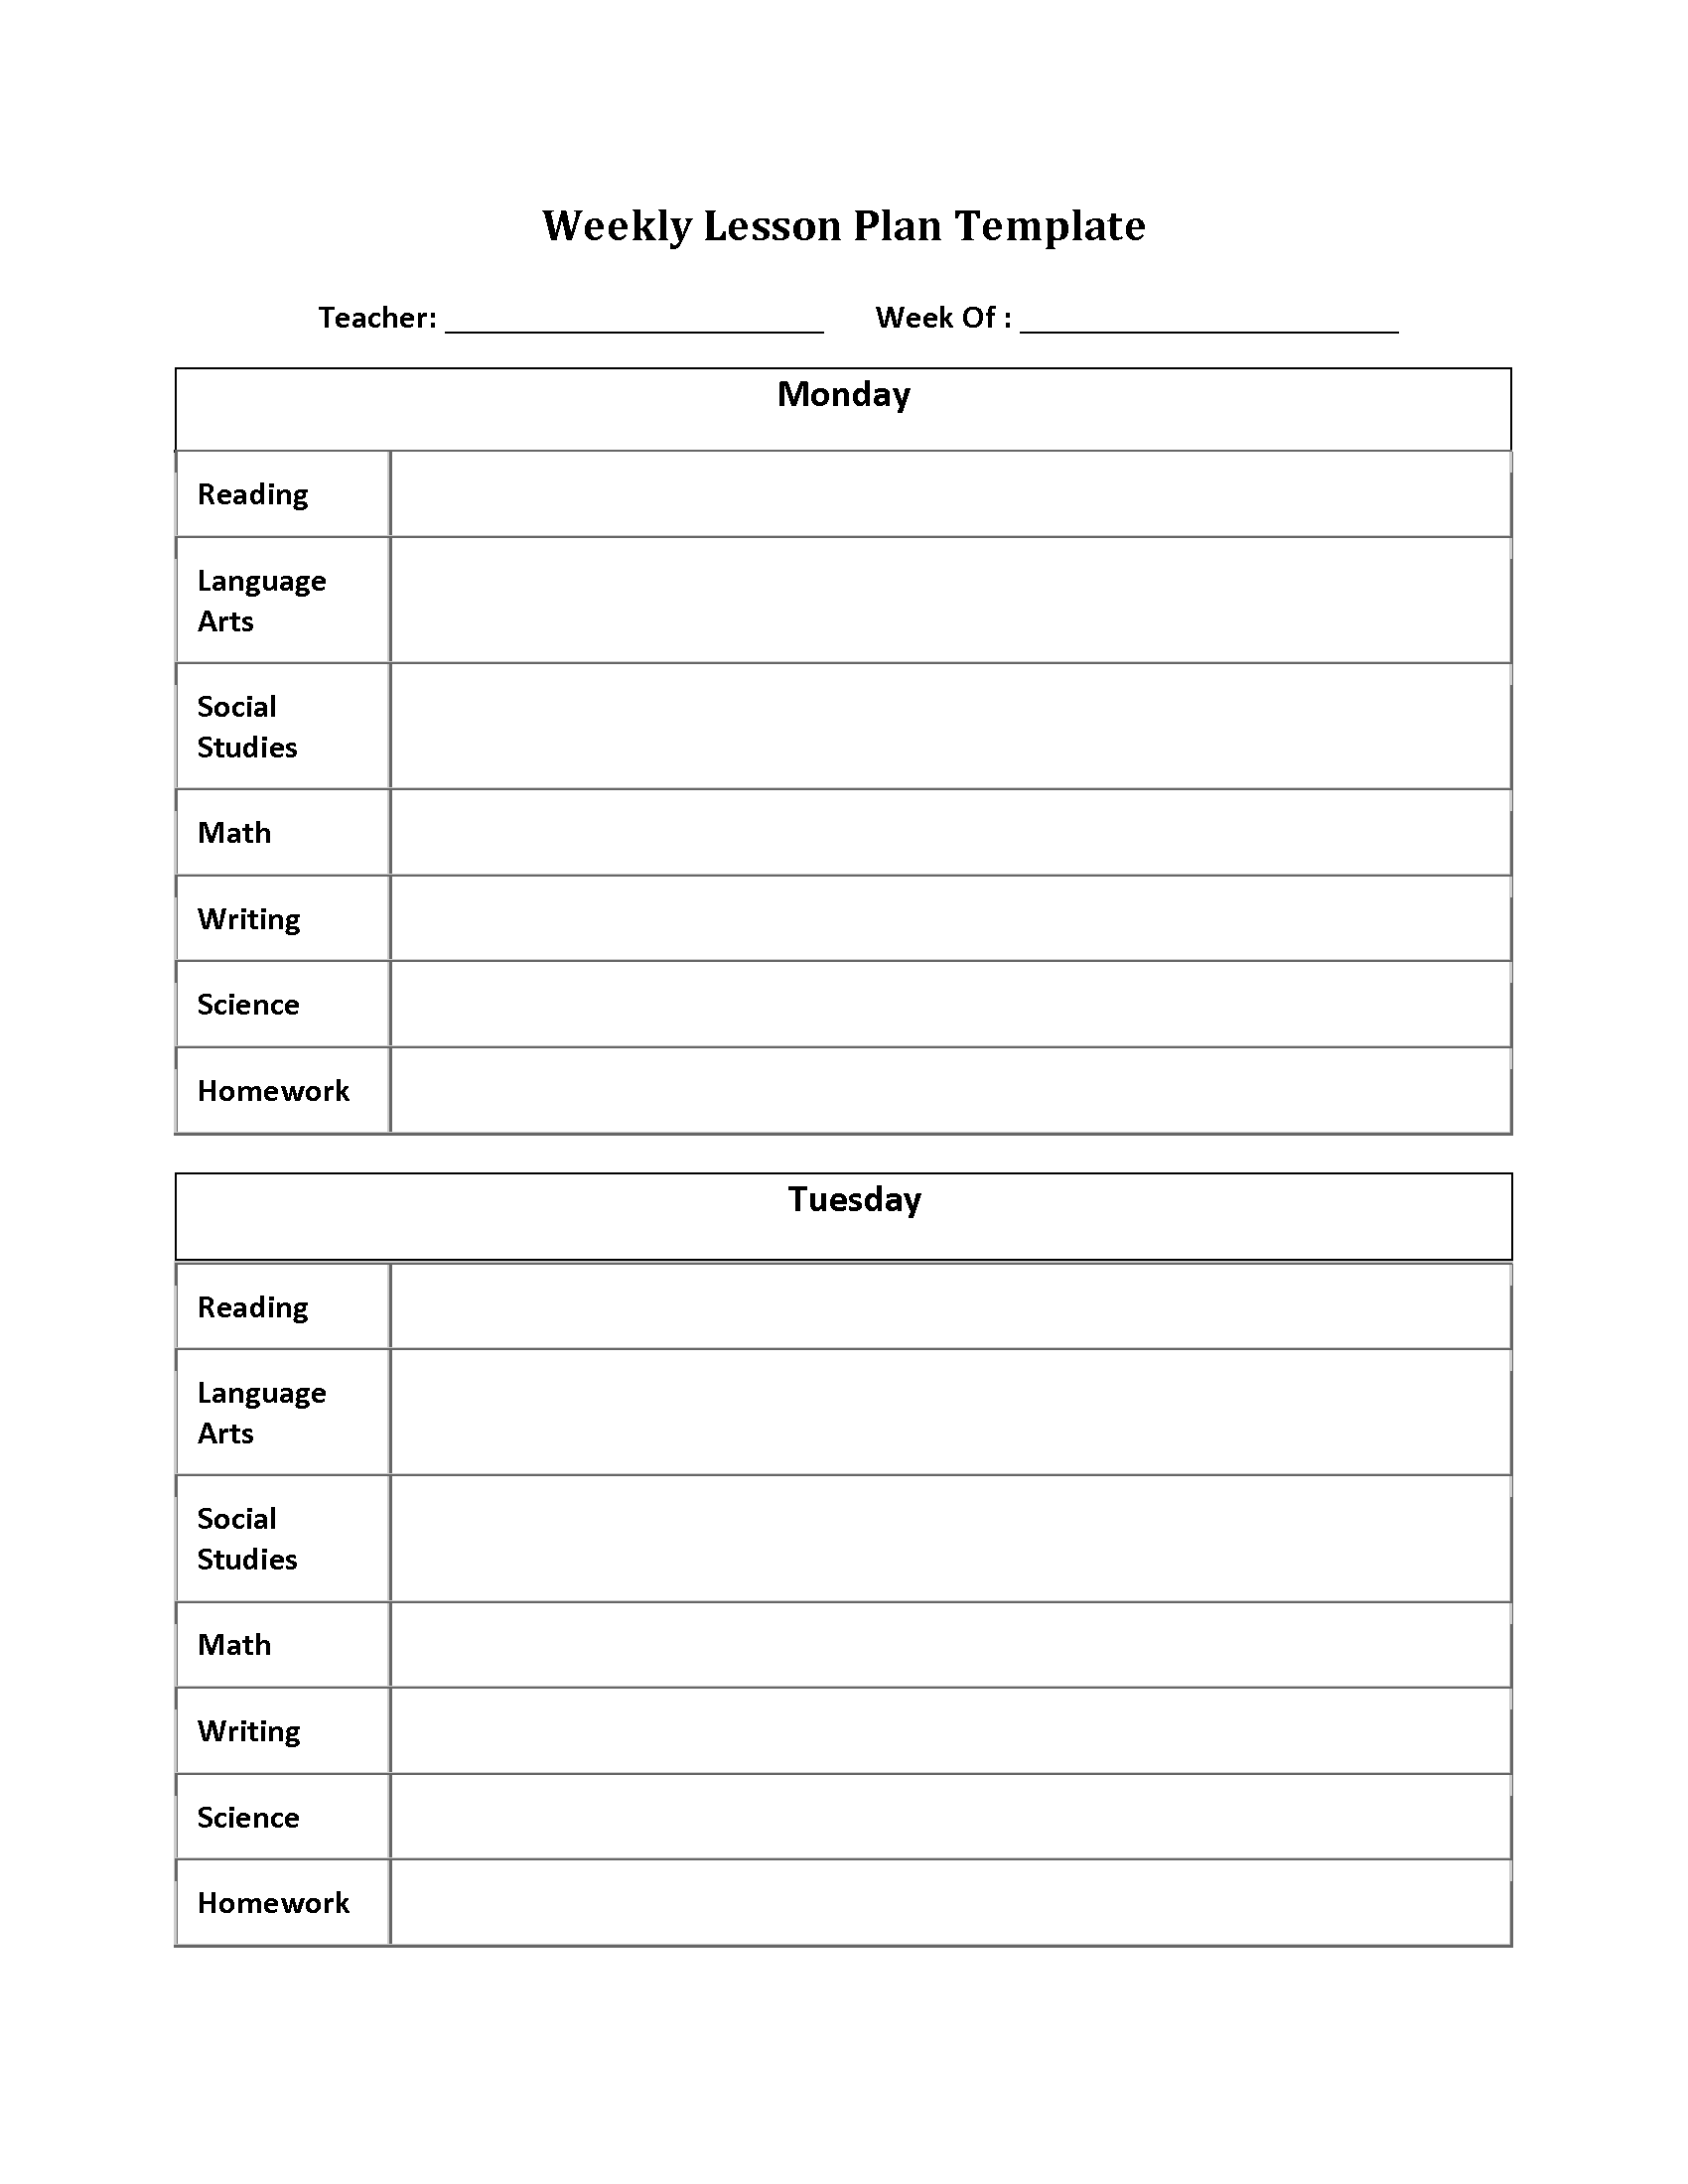 Multiple Subject Weekly Lesson Plan Template